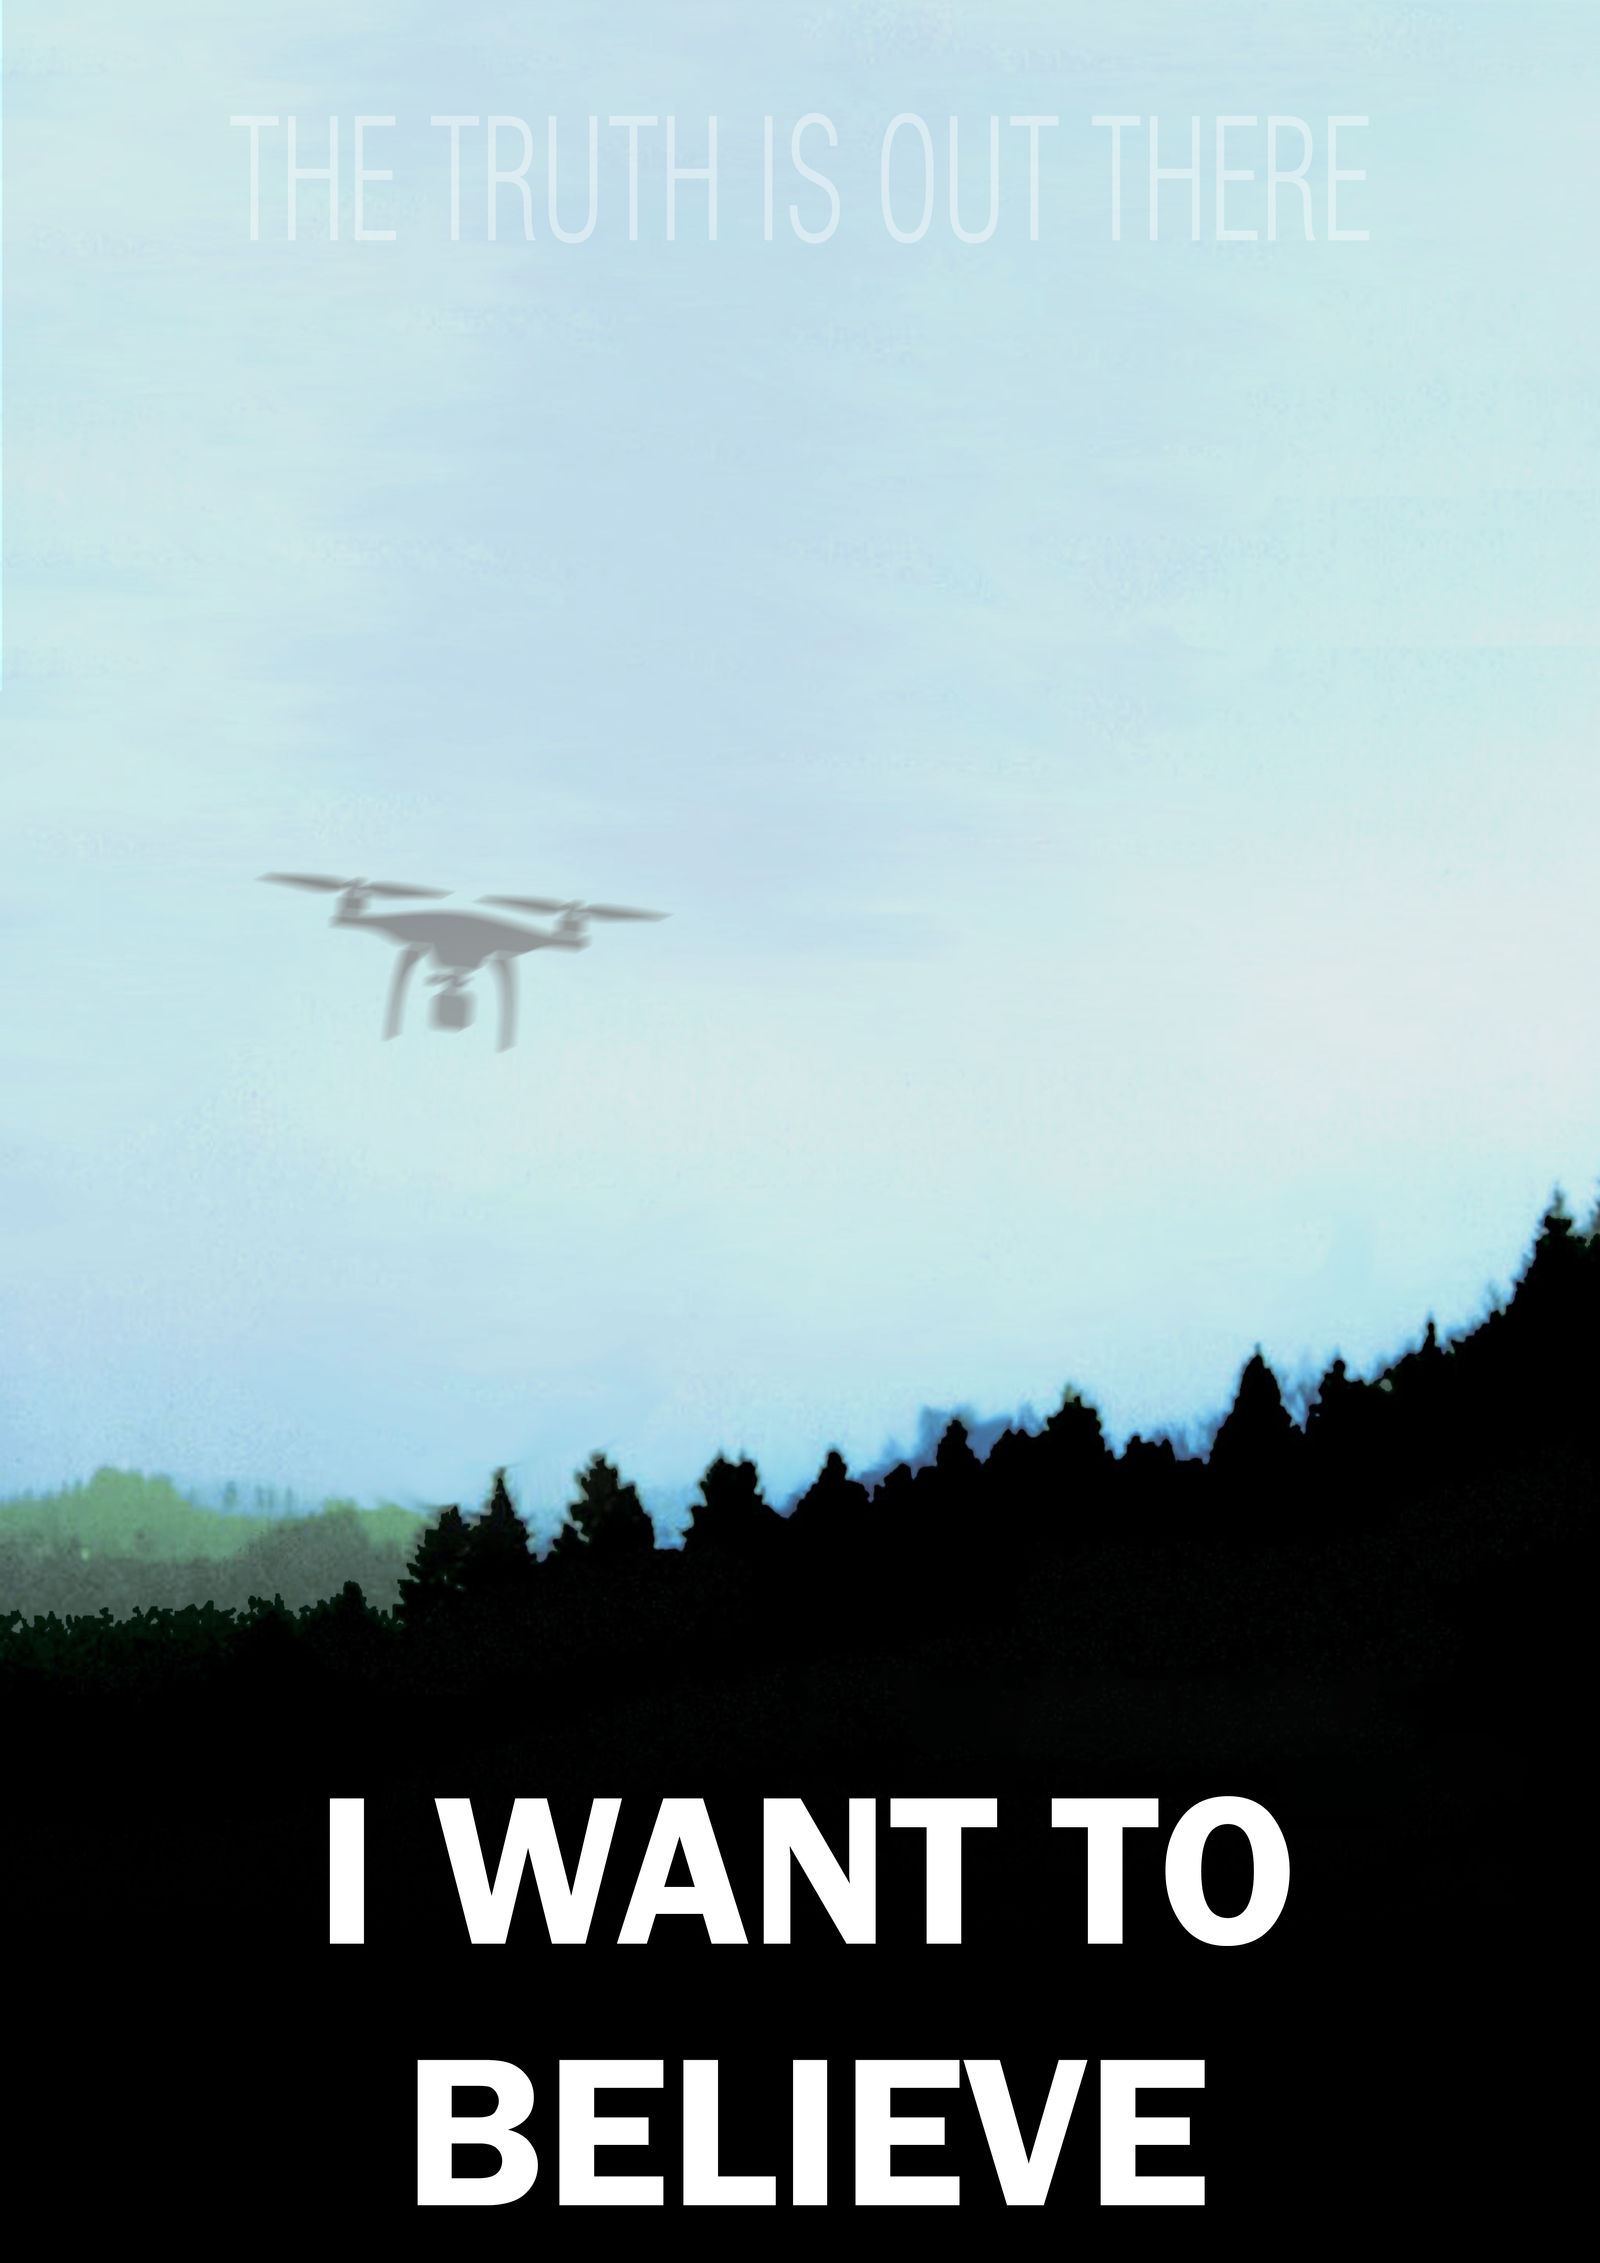 i_want_to_believe_drone_a3_poster_by_topher147_dbnor0n-fullview.jpg